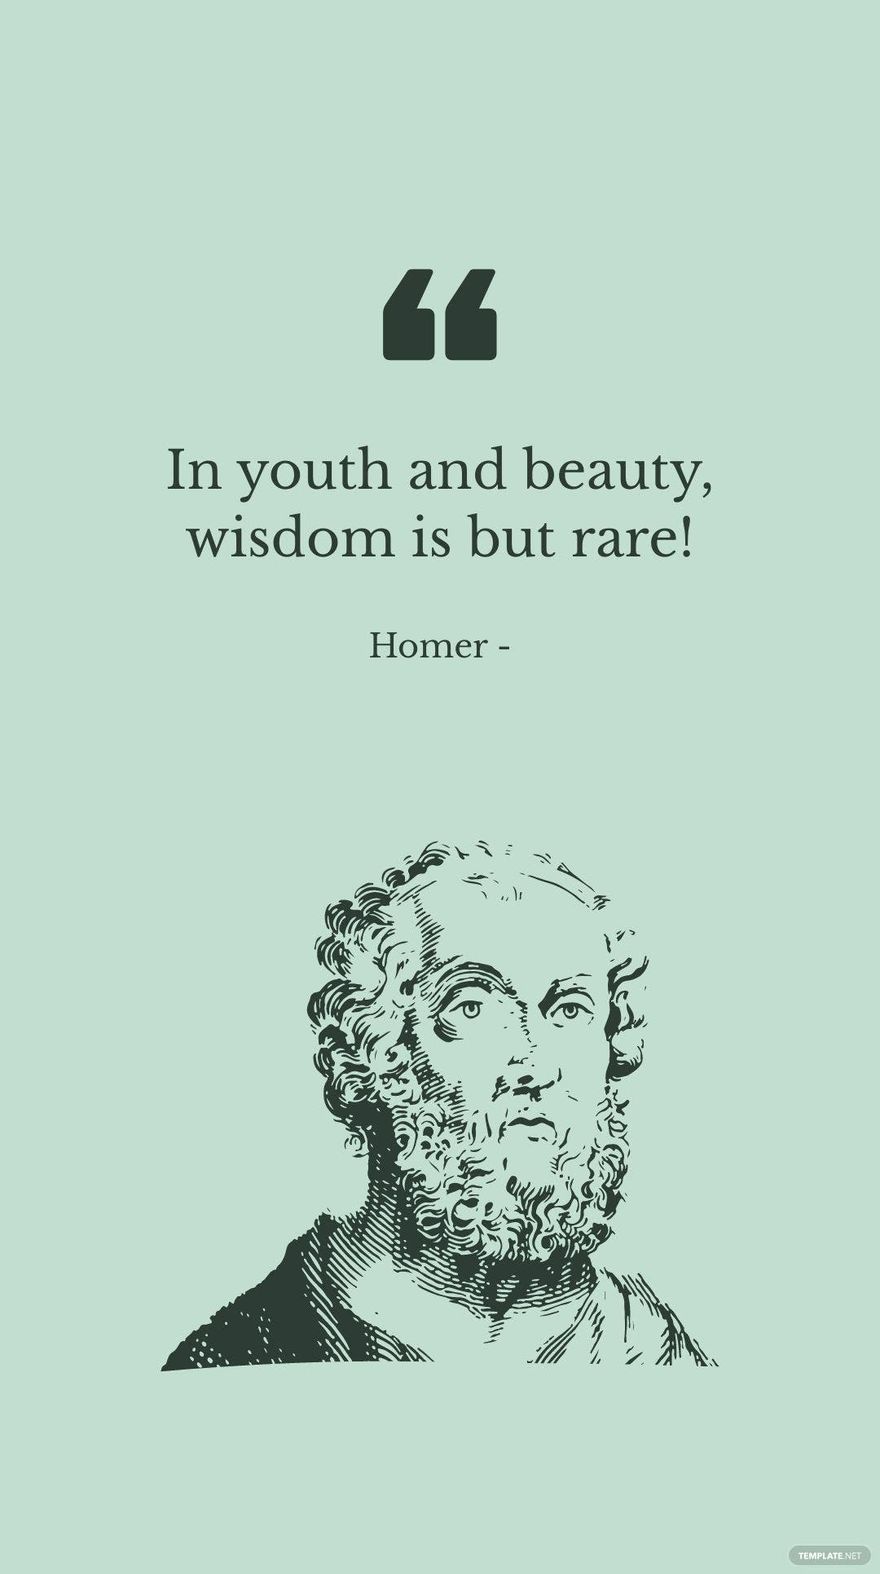 Free Homer - In youth and beauty, wisdom is but rare! in JPG